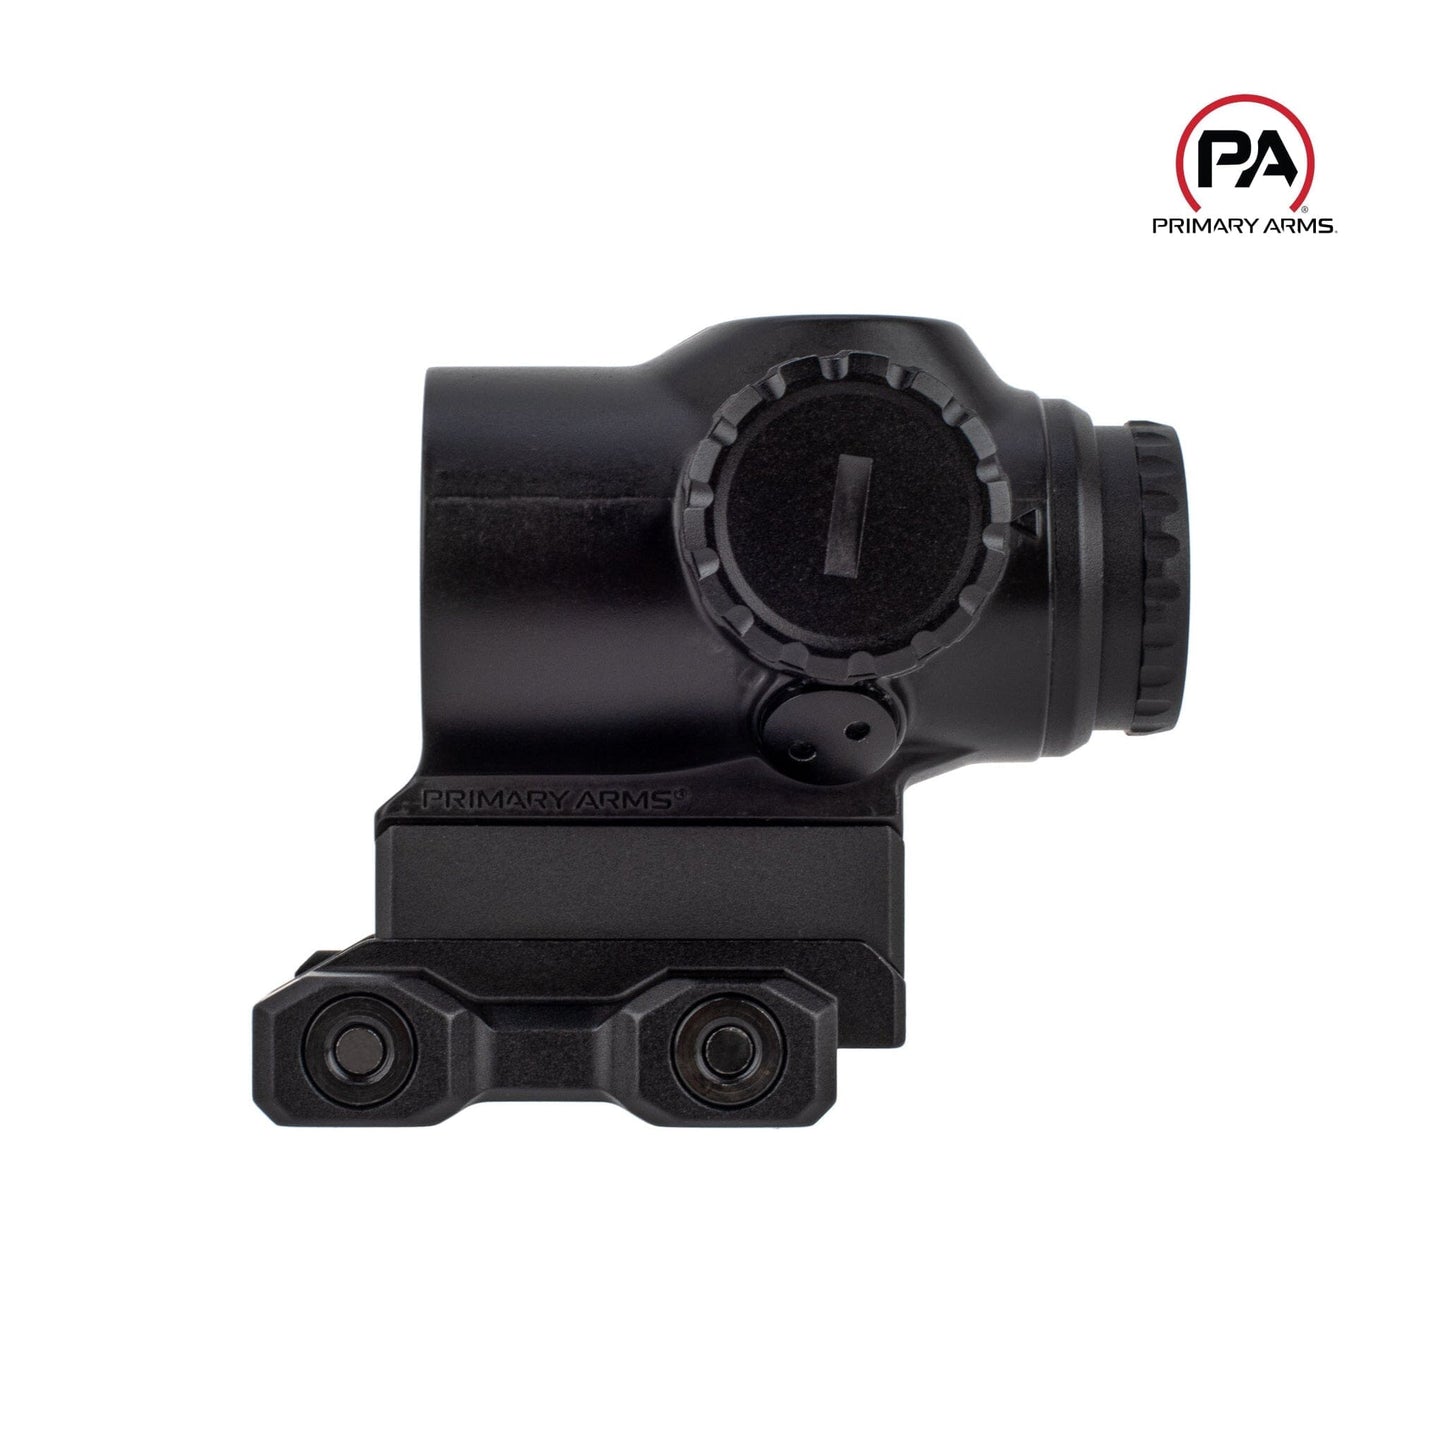 Primary Arms SLx 1X MicroPrism Scope - Green ACSS Cyclops Reticle - Gen II Prism Rifle Scope Primary Arms 